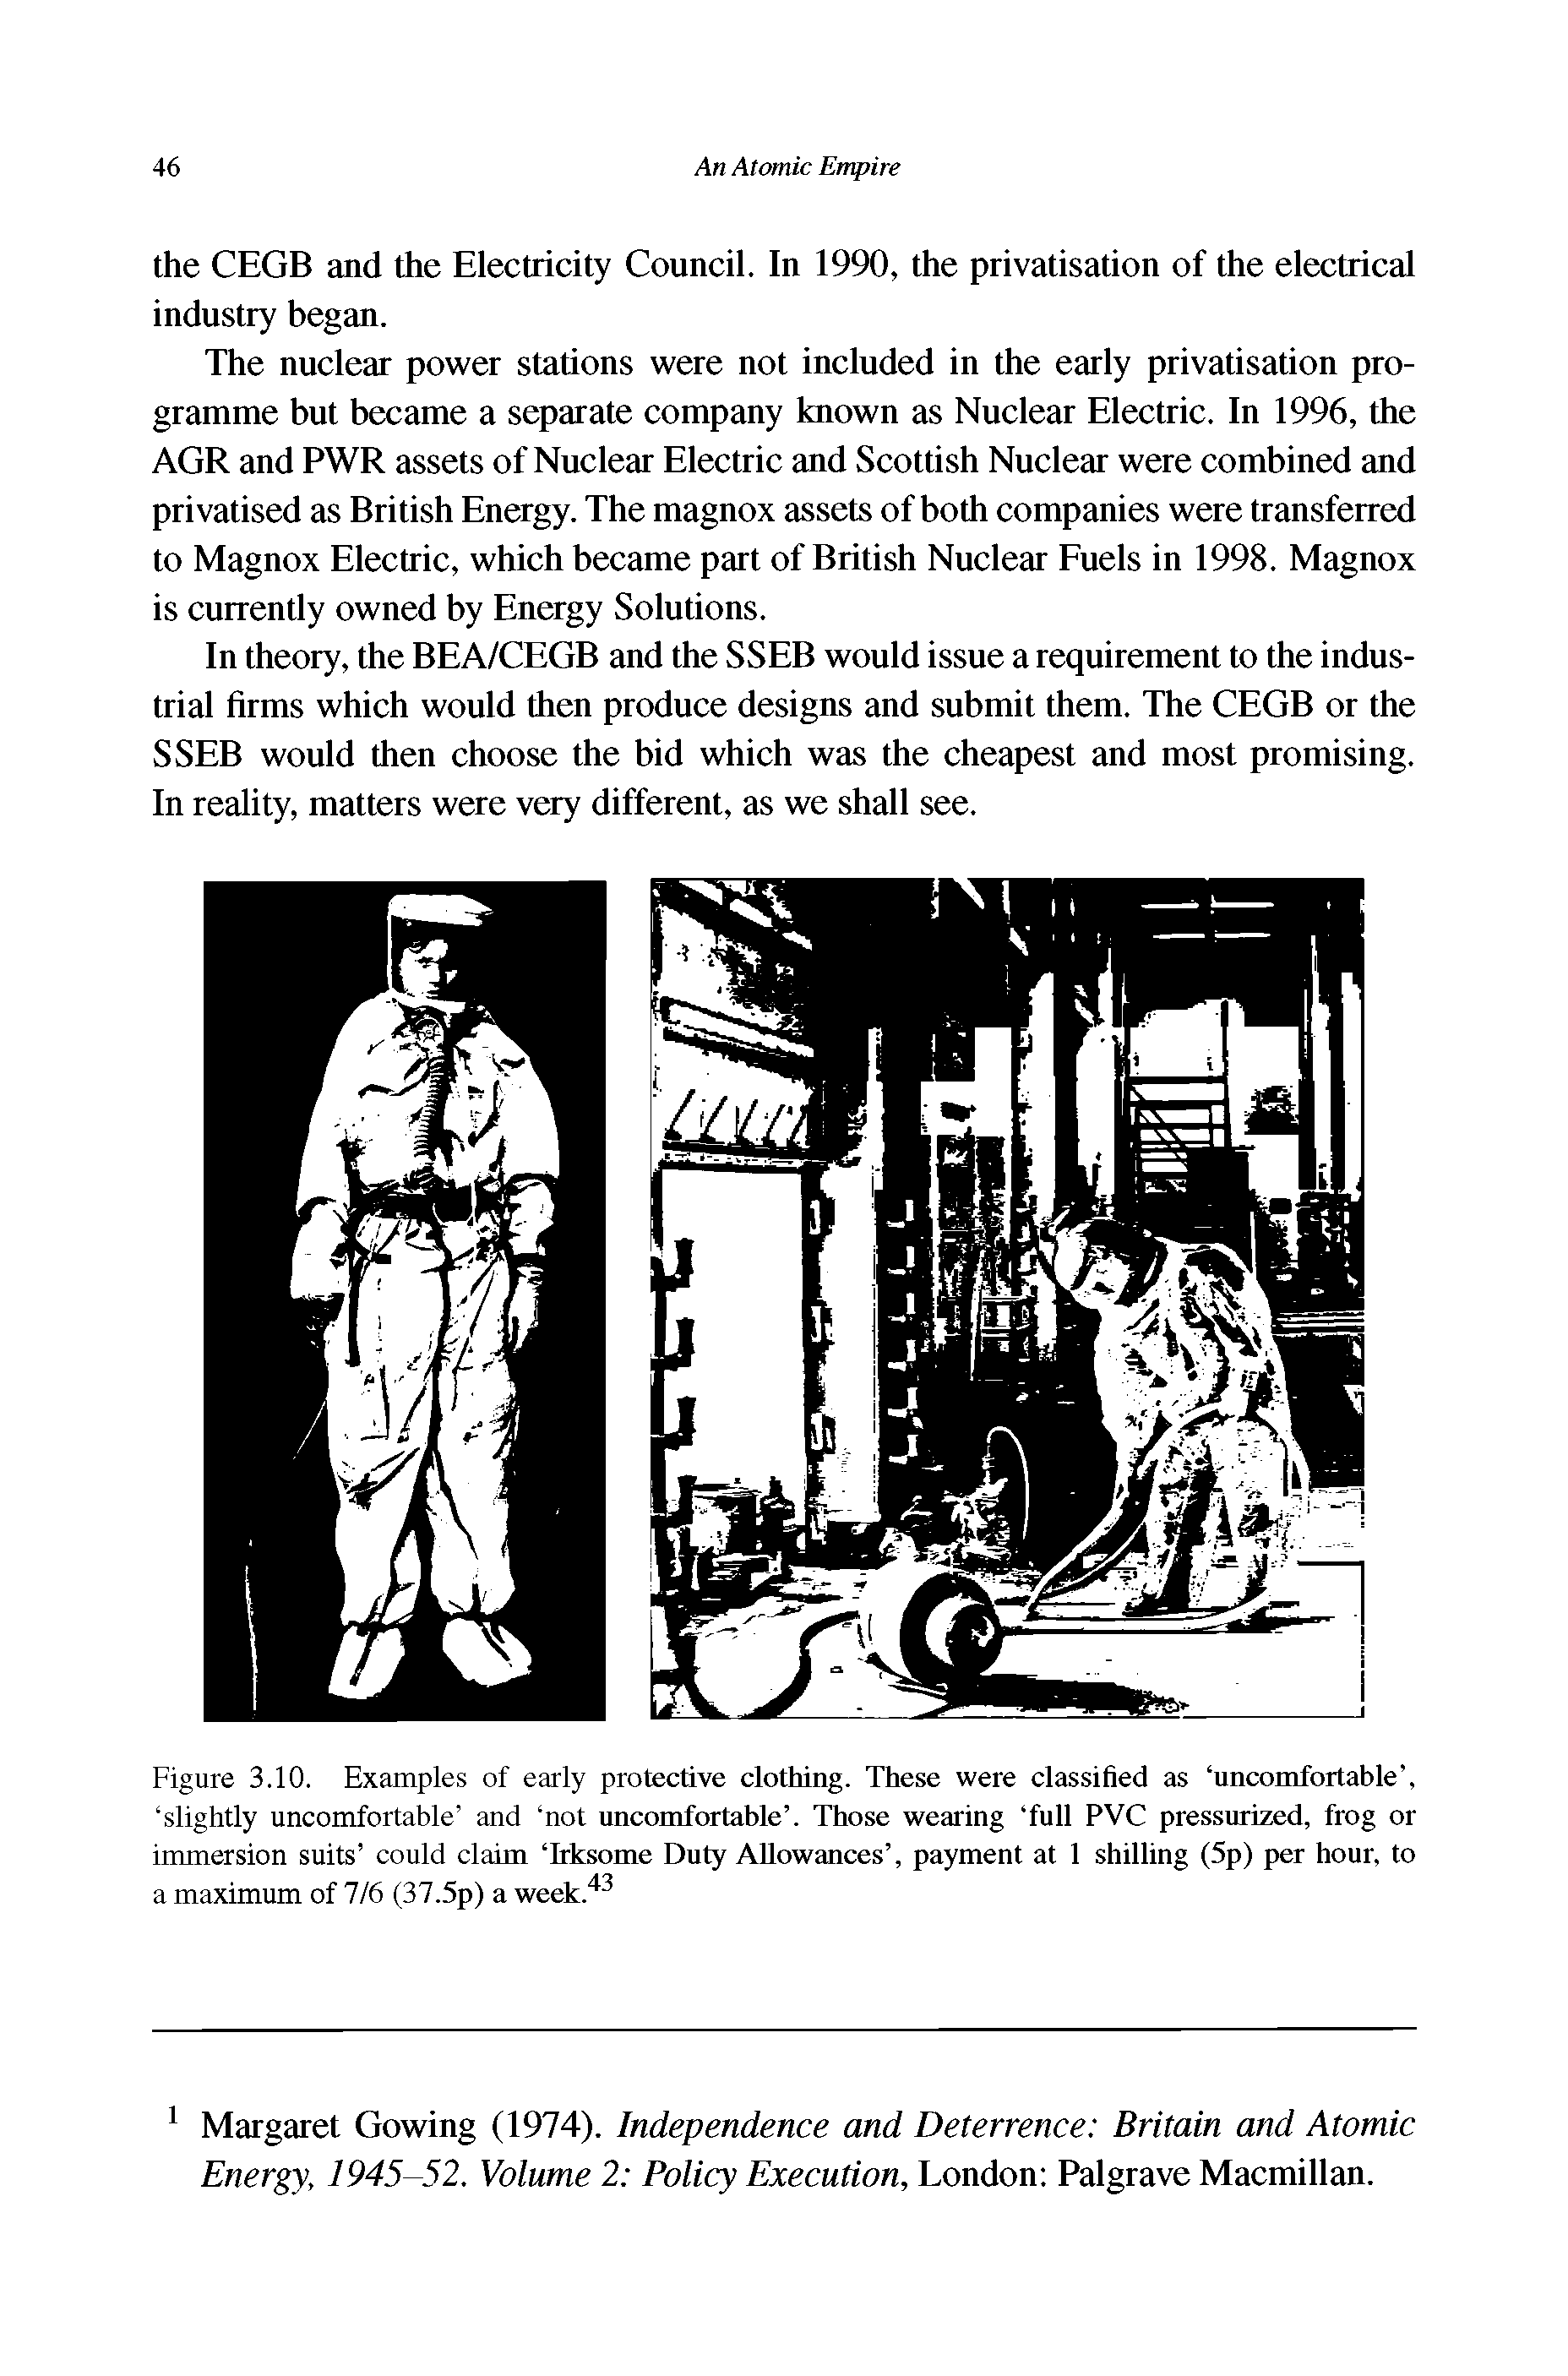 Figure 3.10. Examples of early protective clothing. These were classified as uncomfortable , slightly uncomfortable and not uncomfortable . Those wearing full PVC pressurized, frog or immersion suits could claim Irksome Duty Allowances , payment at 1 shilling (5p) per hour, to a maximum of 7/6 (37.5p) a week. ...